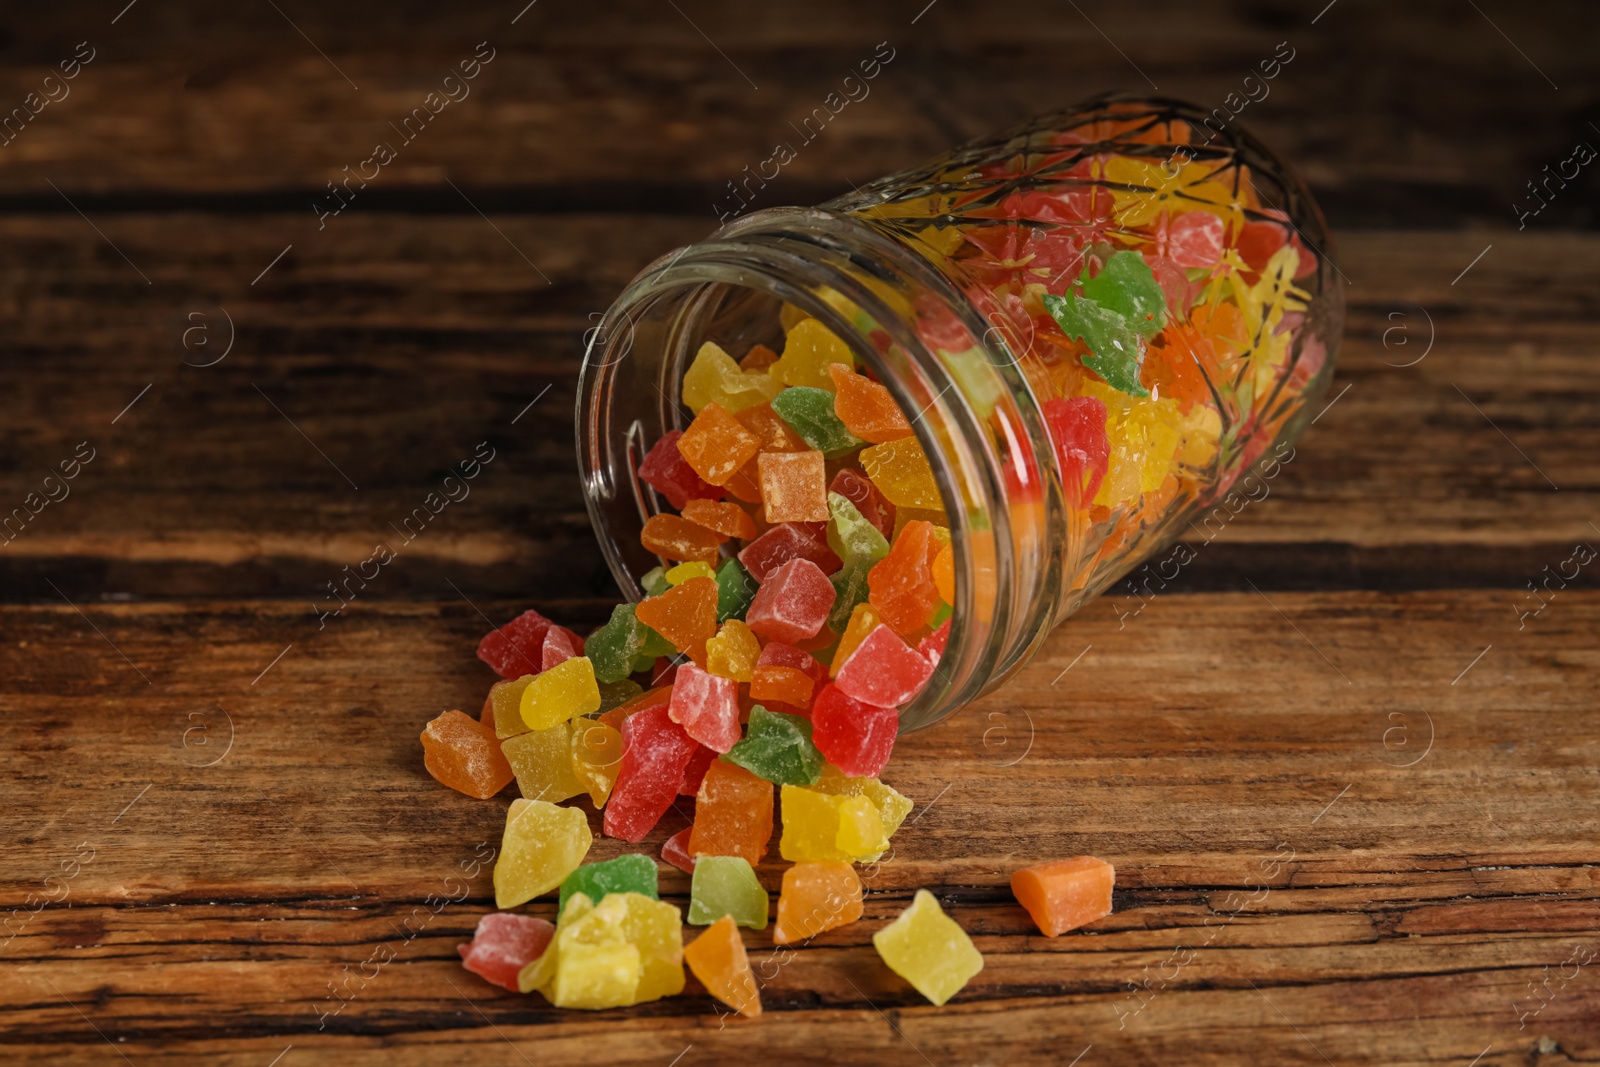 Photo of Overturned jar with mix of delicious candied fruits on wooden table